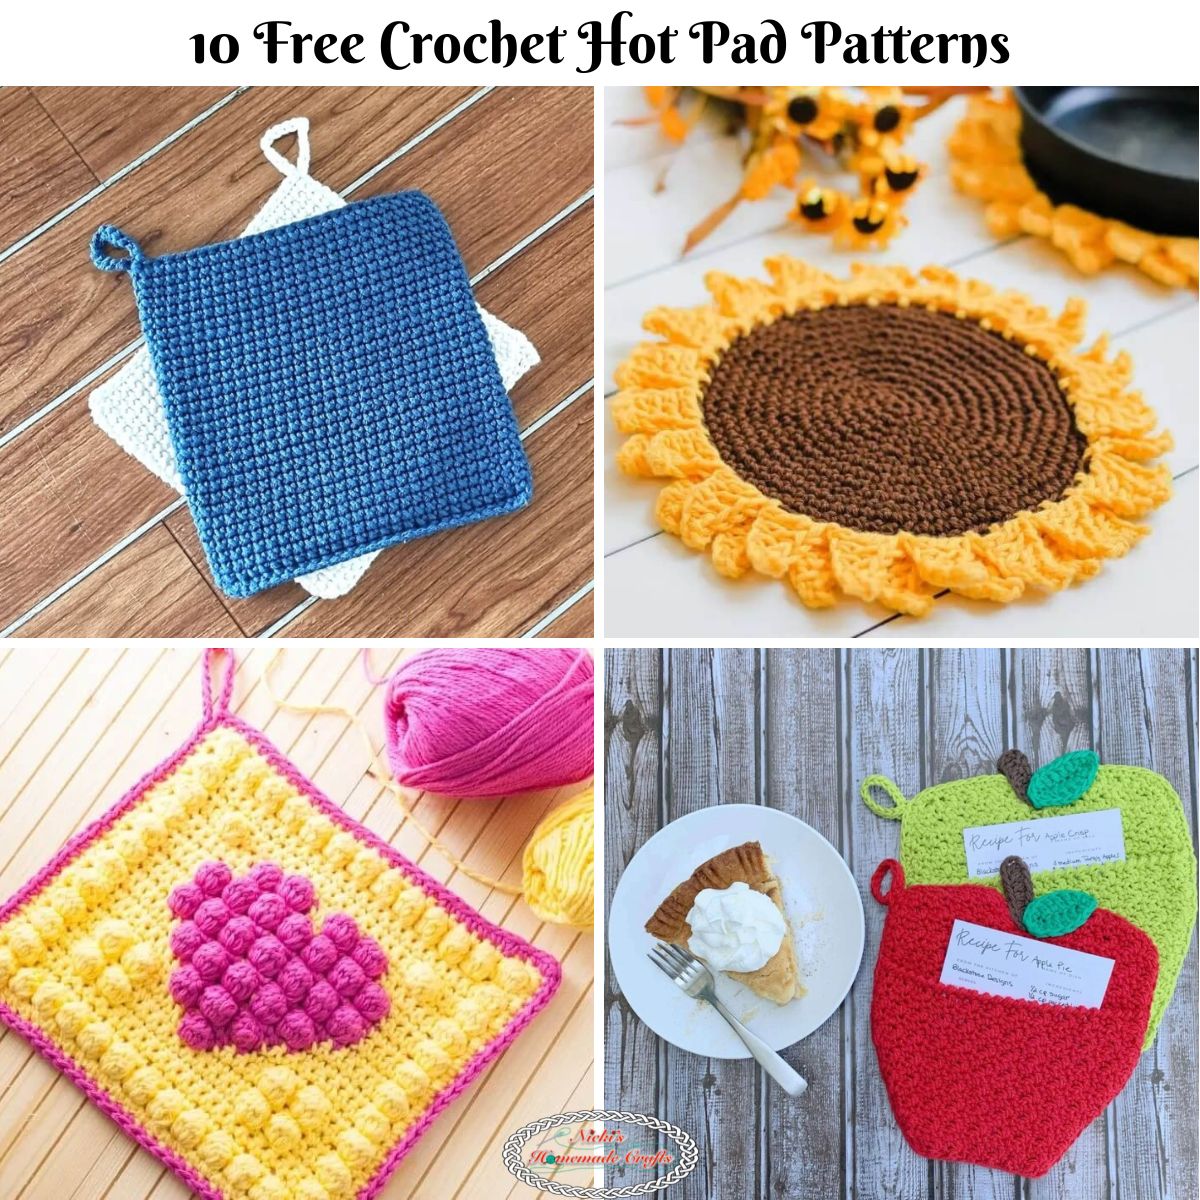 10 Stylish Crochet Hot Pads For Your Kitchen - Nicki's Homemade Crafts